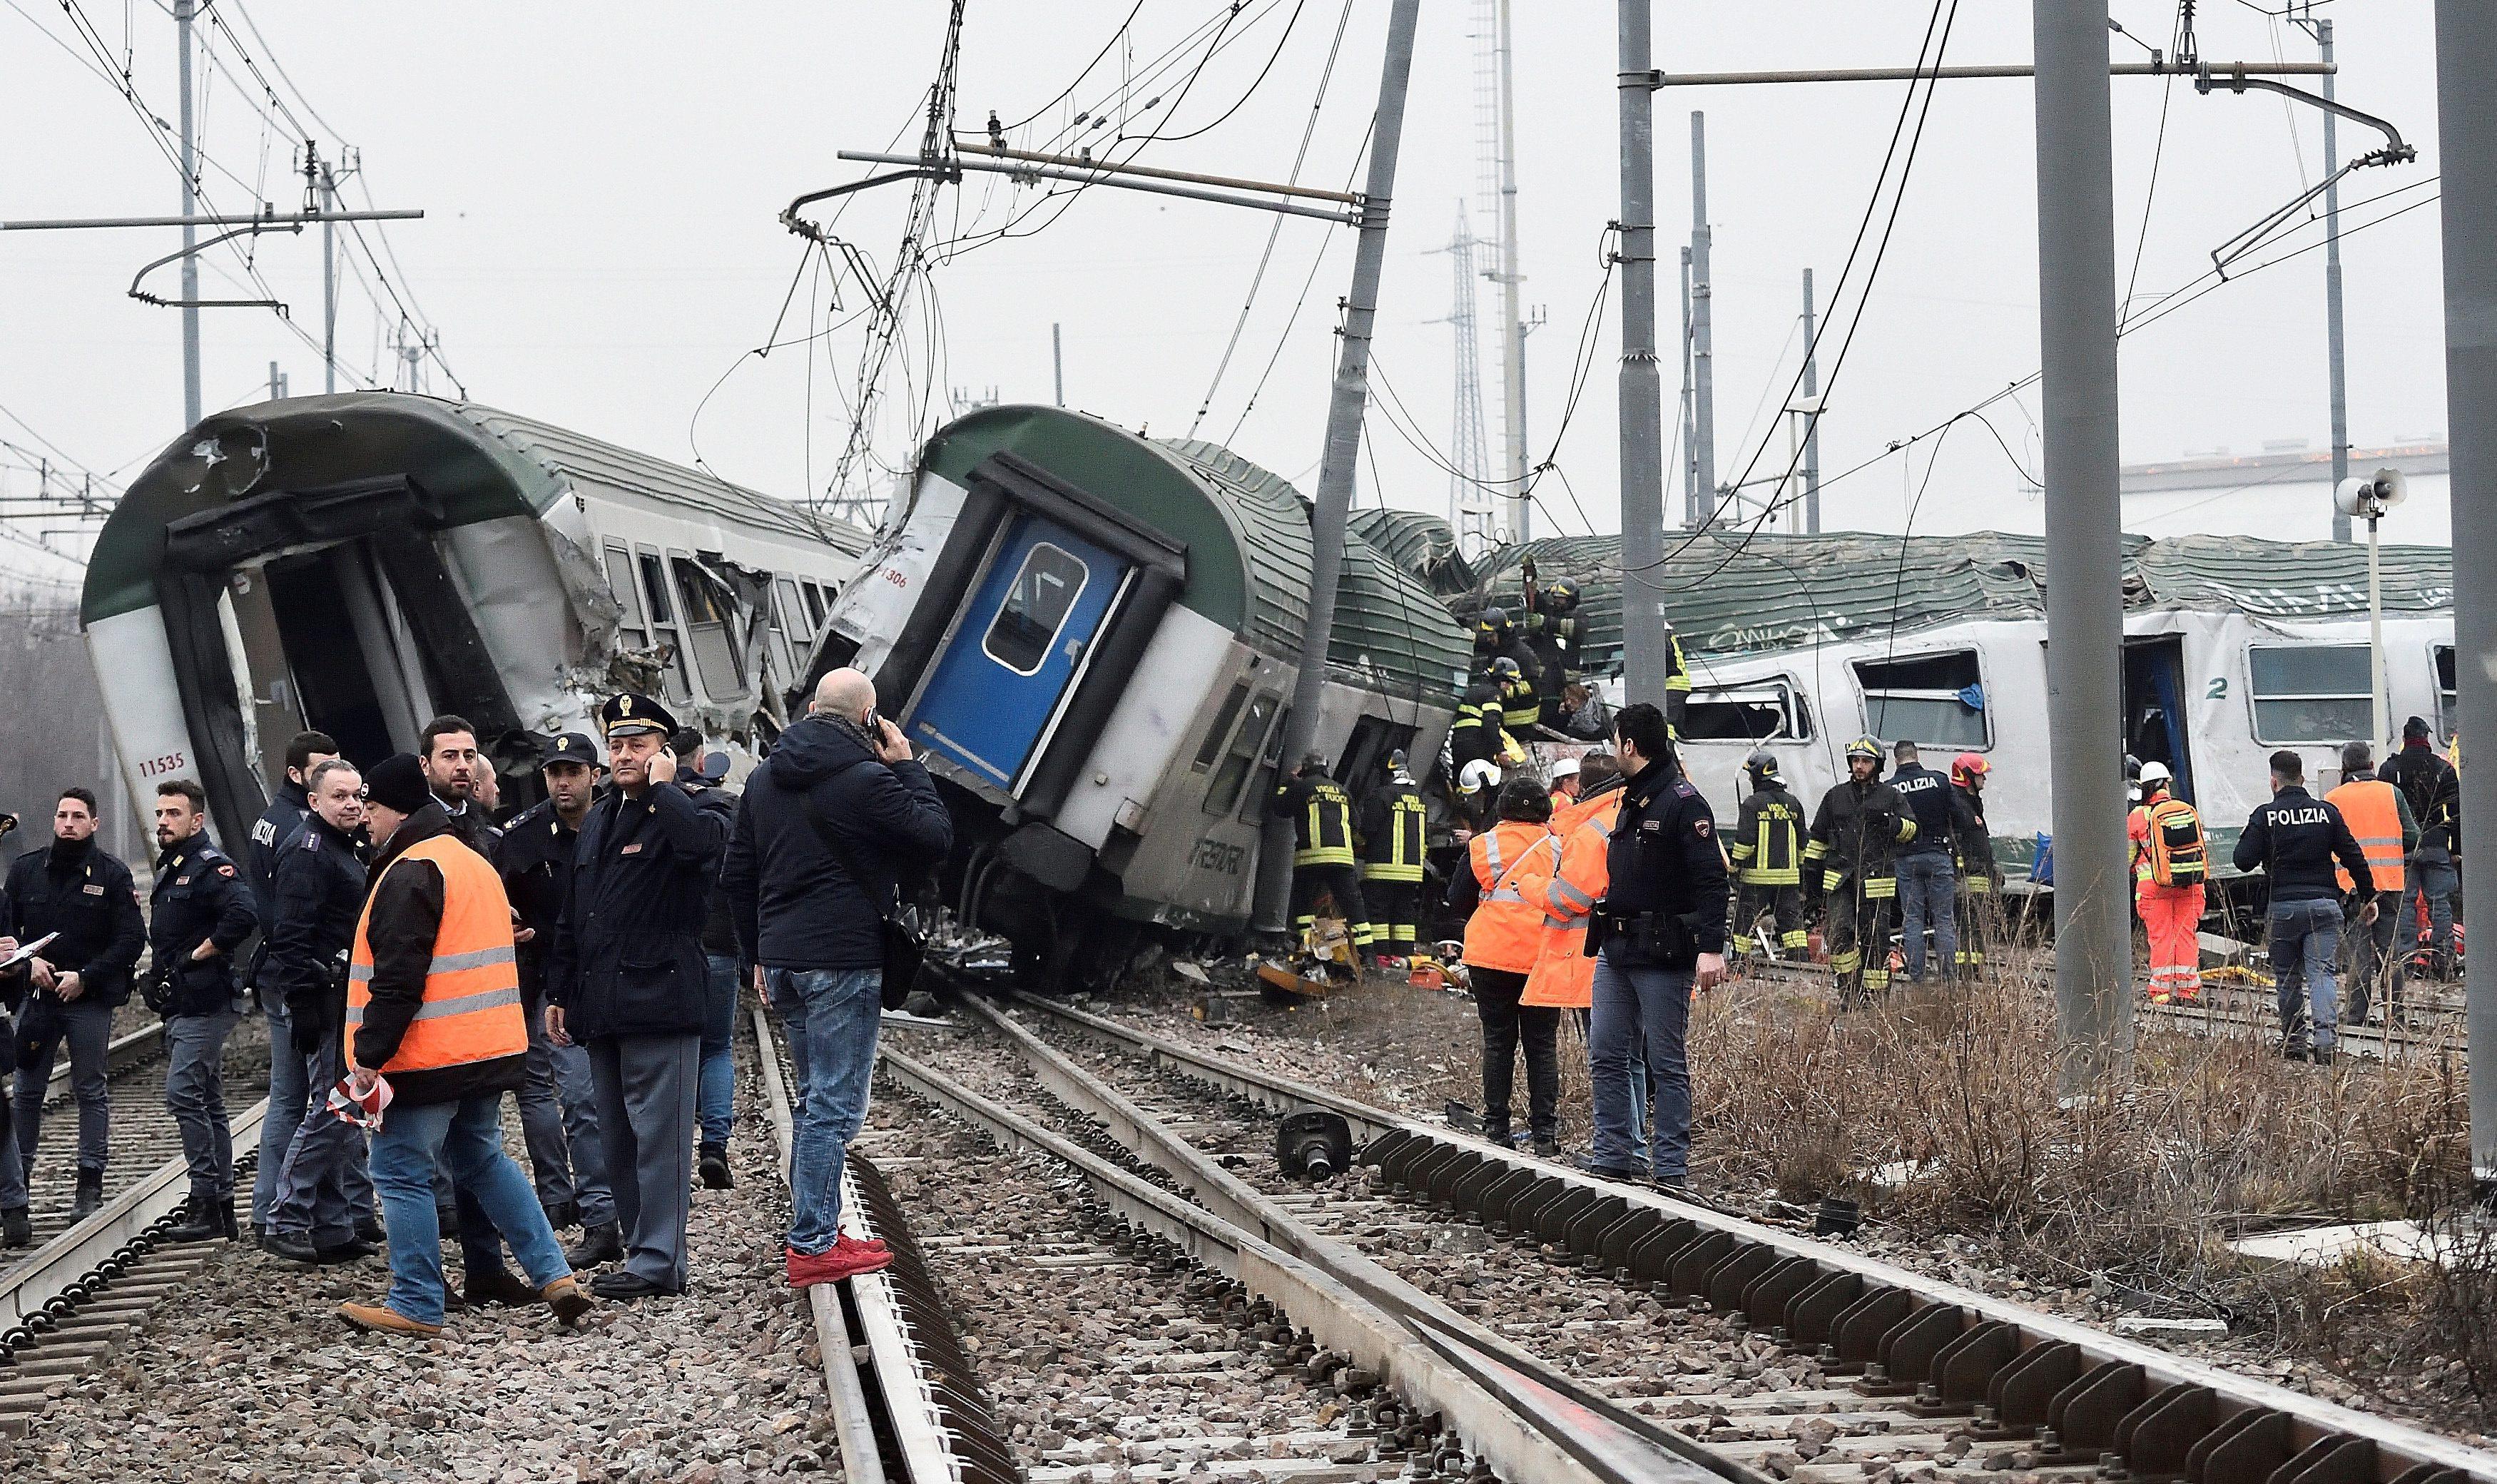 Rescue workers and police officers stand near derailed trains in Pioltello, on the outskirts of Mila